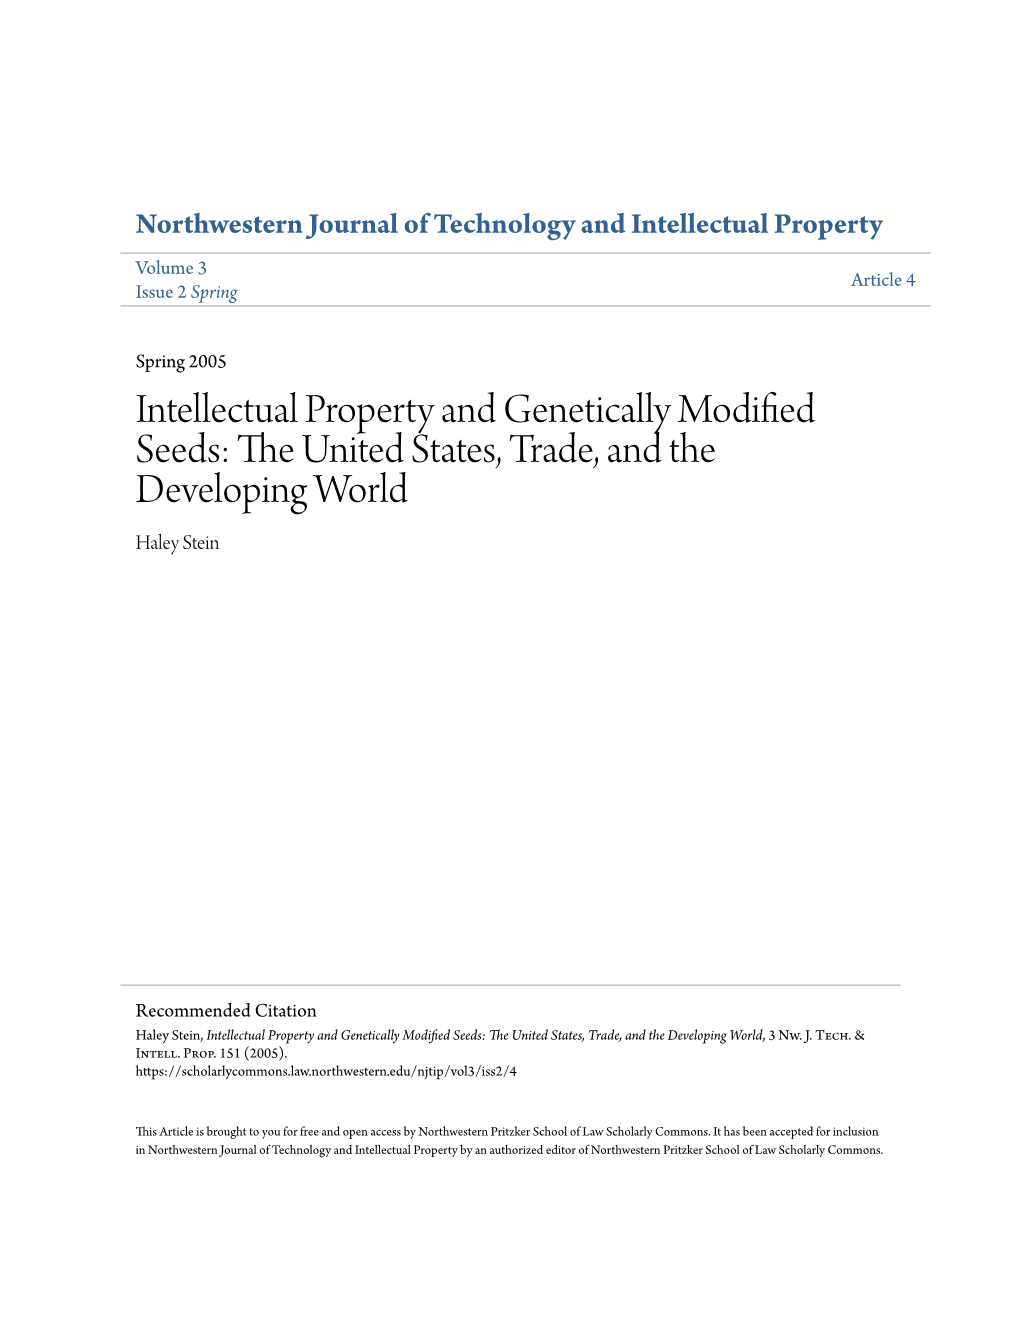 Intellectual Property and Genetically Modified Seeds: the United States, Trade, and the Developing World, 3 Nw